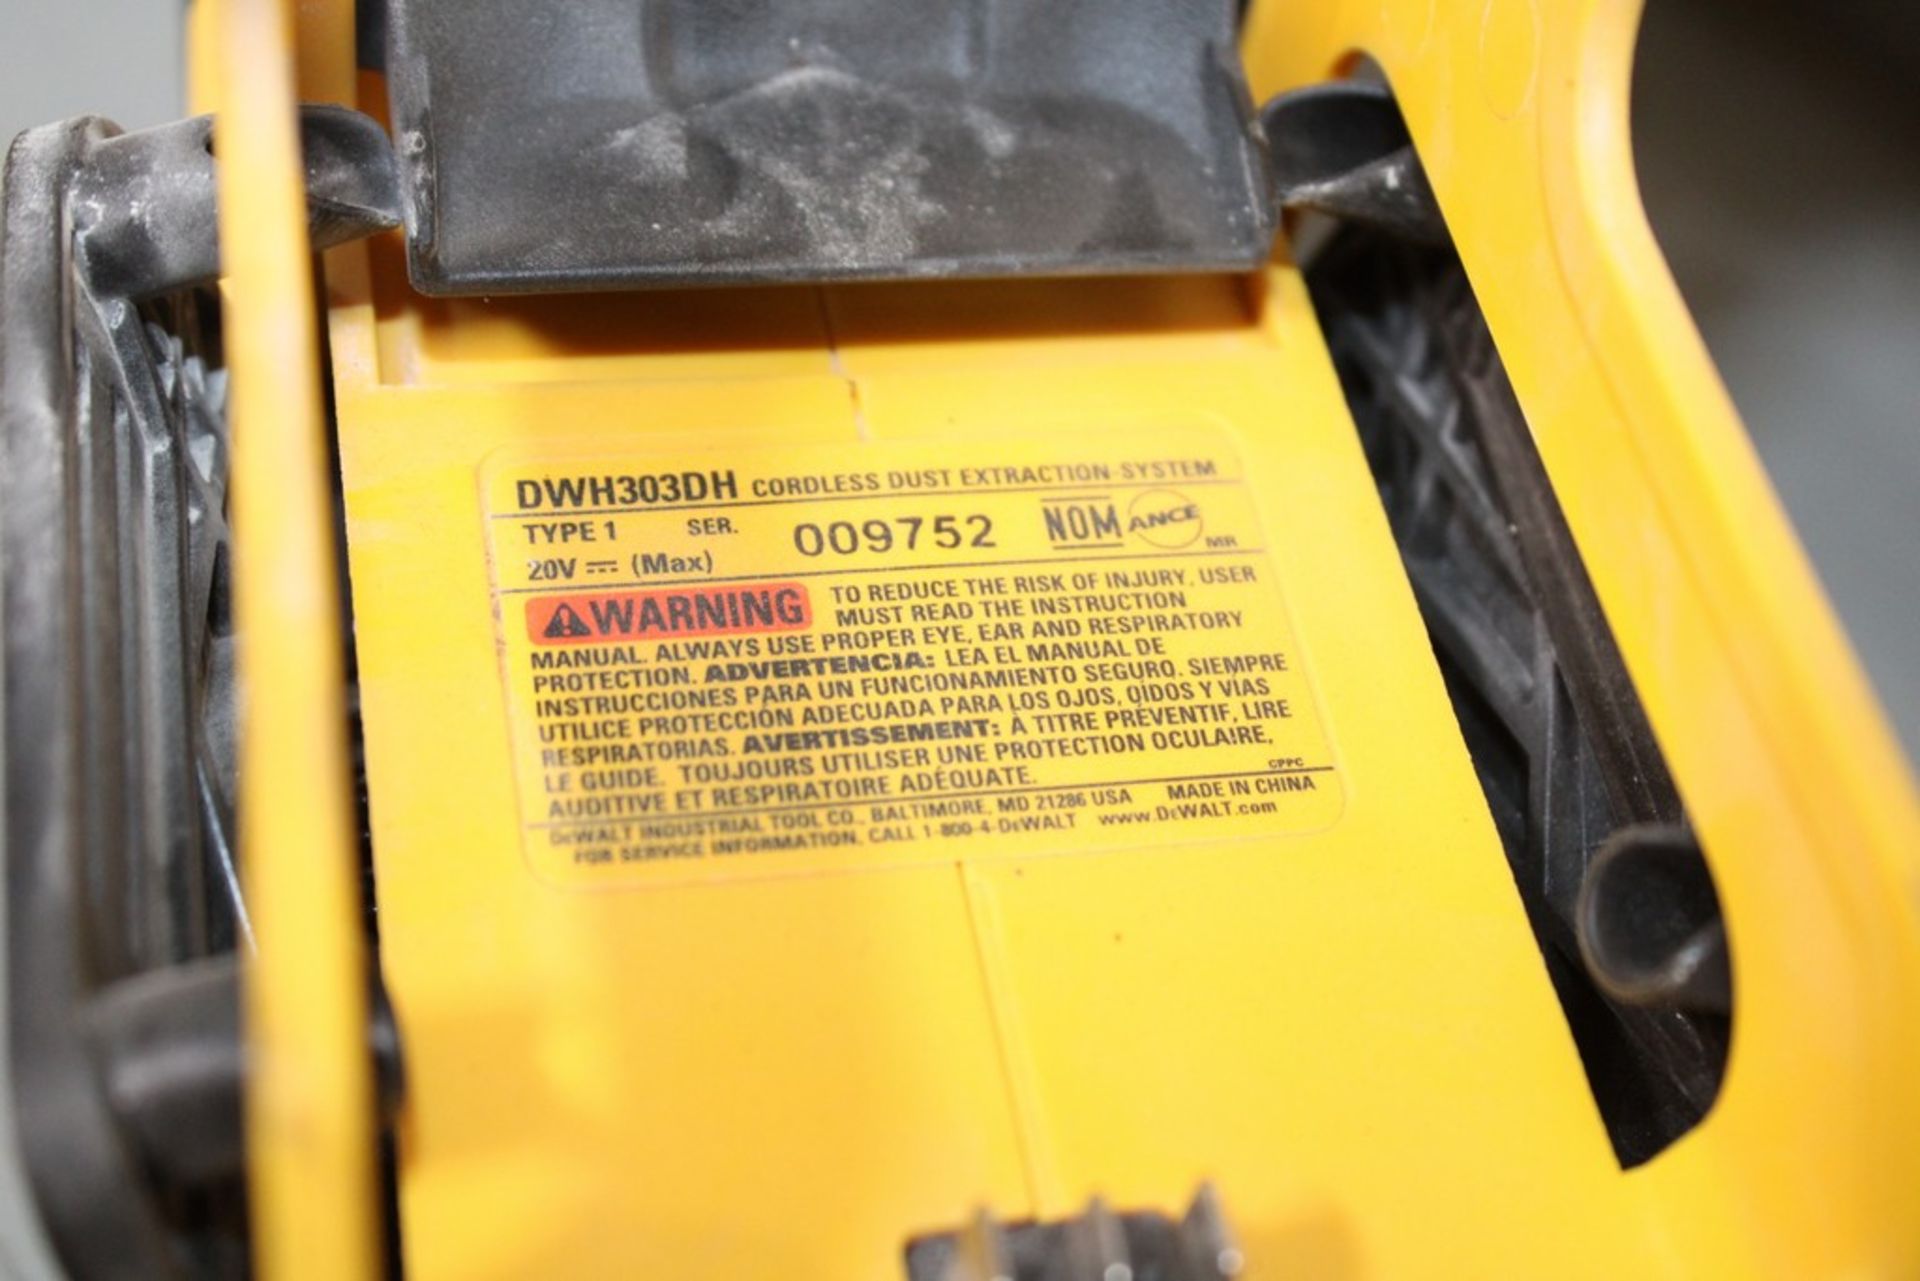 DEWALT MODEL DWH303 DH CORDLESS DUST EXTRACTION SYSTEM - Image 2 of 2